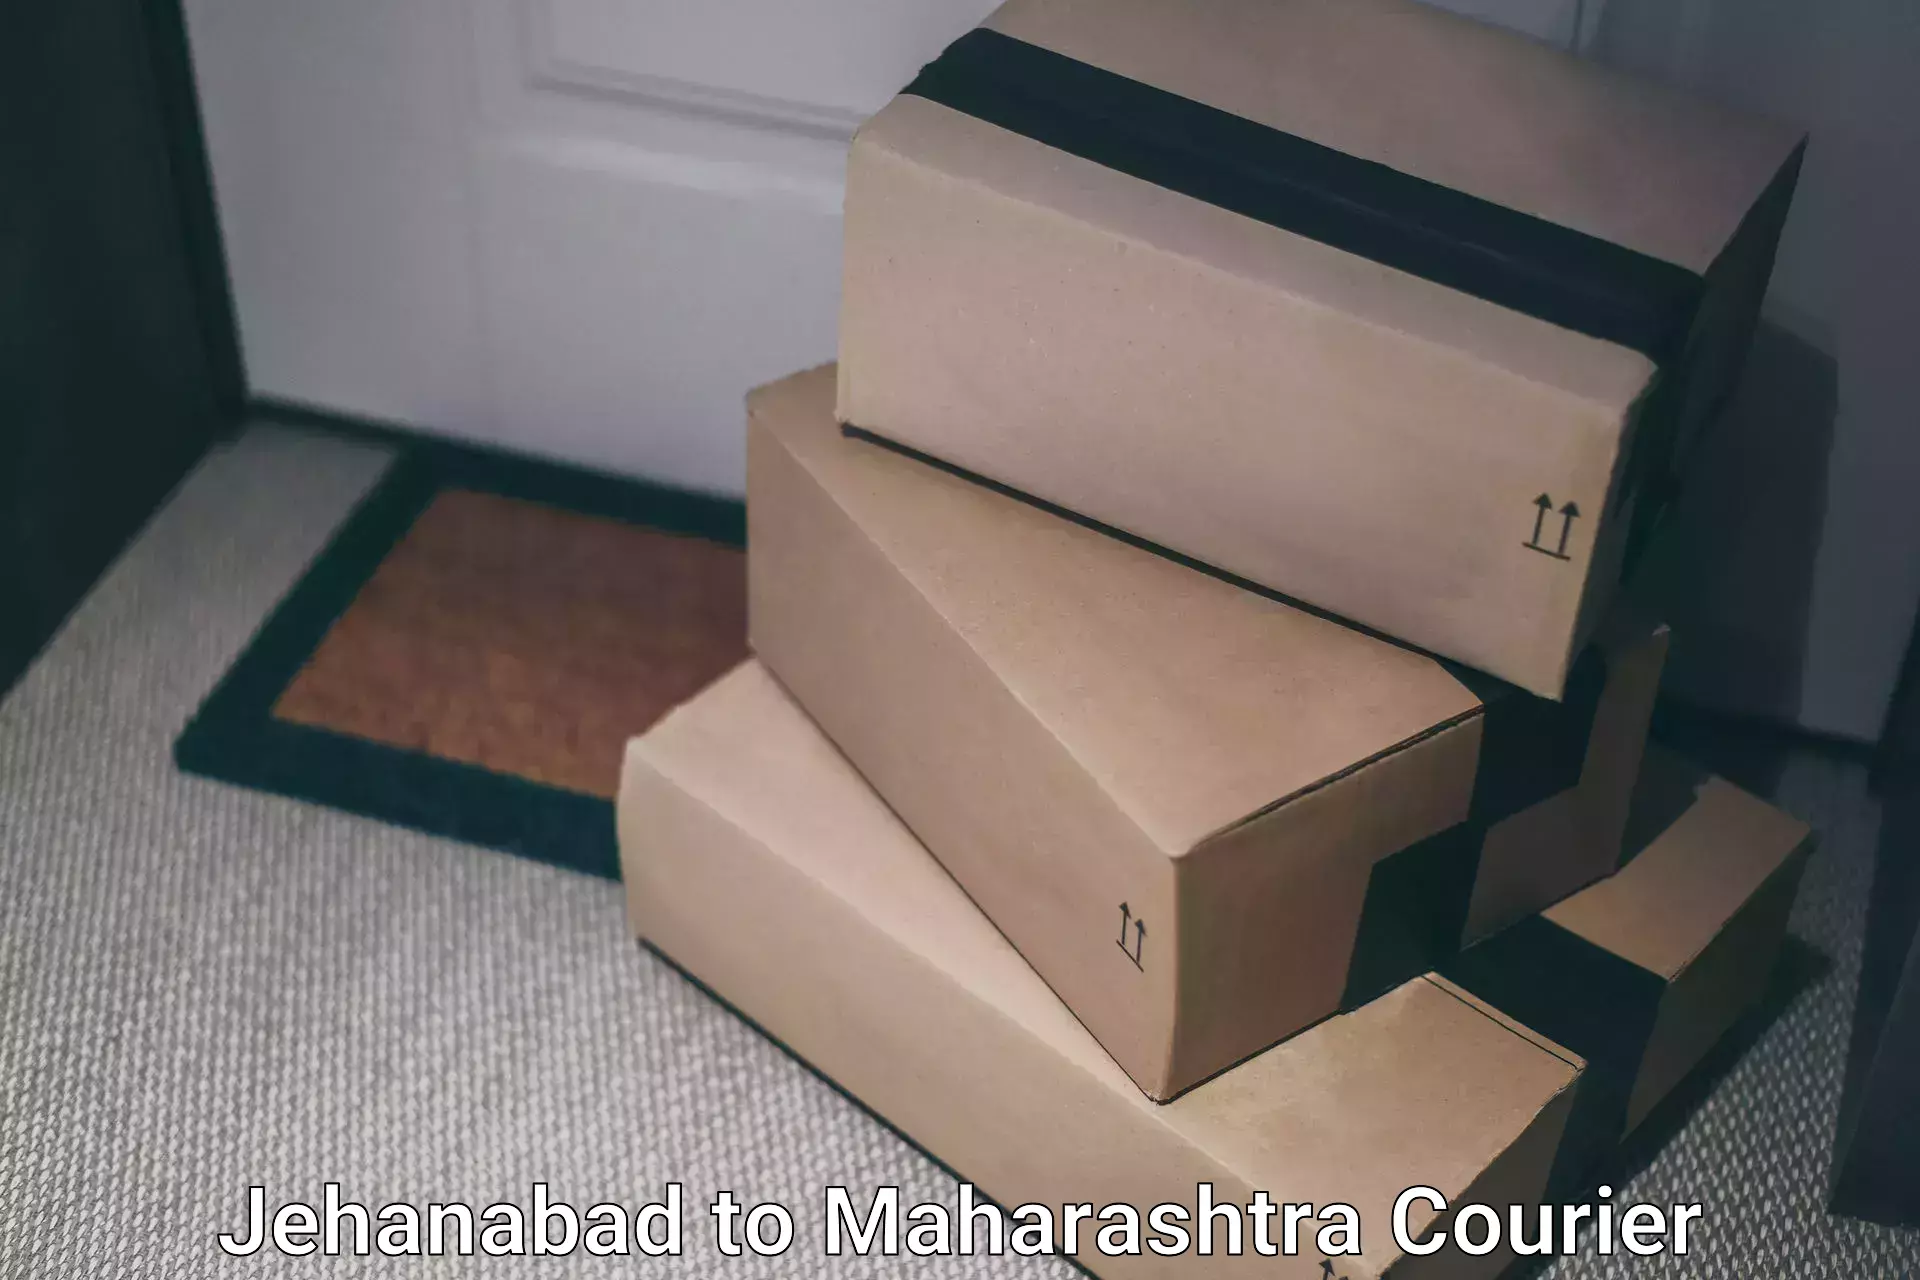 Seamless shipping experience Jehanabad to Andheri